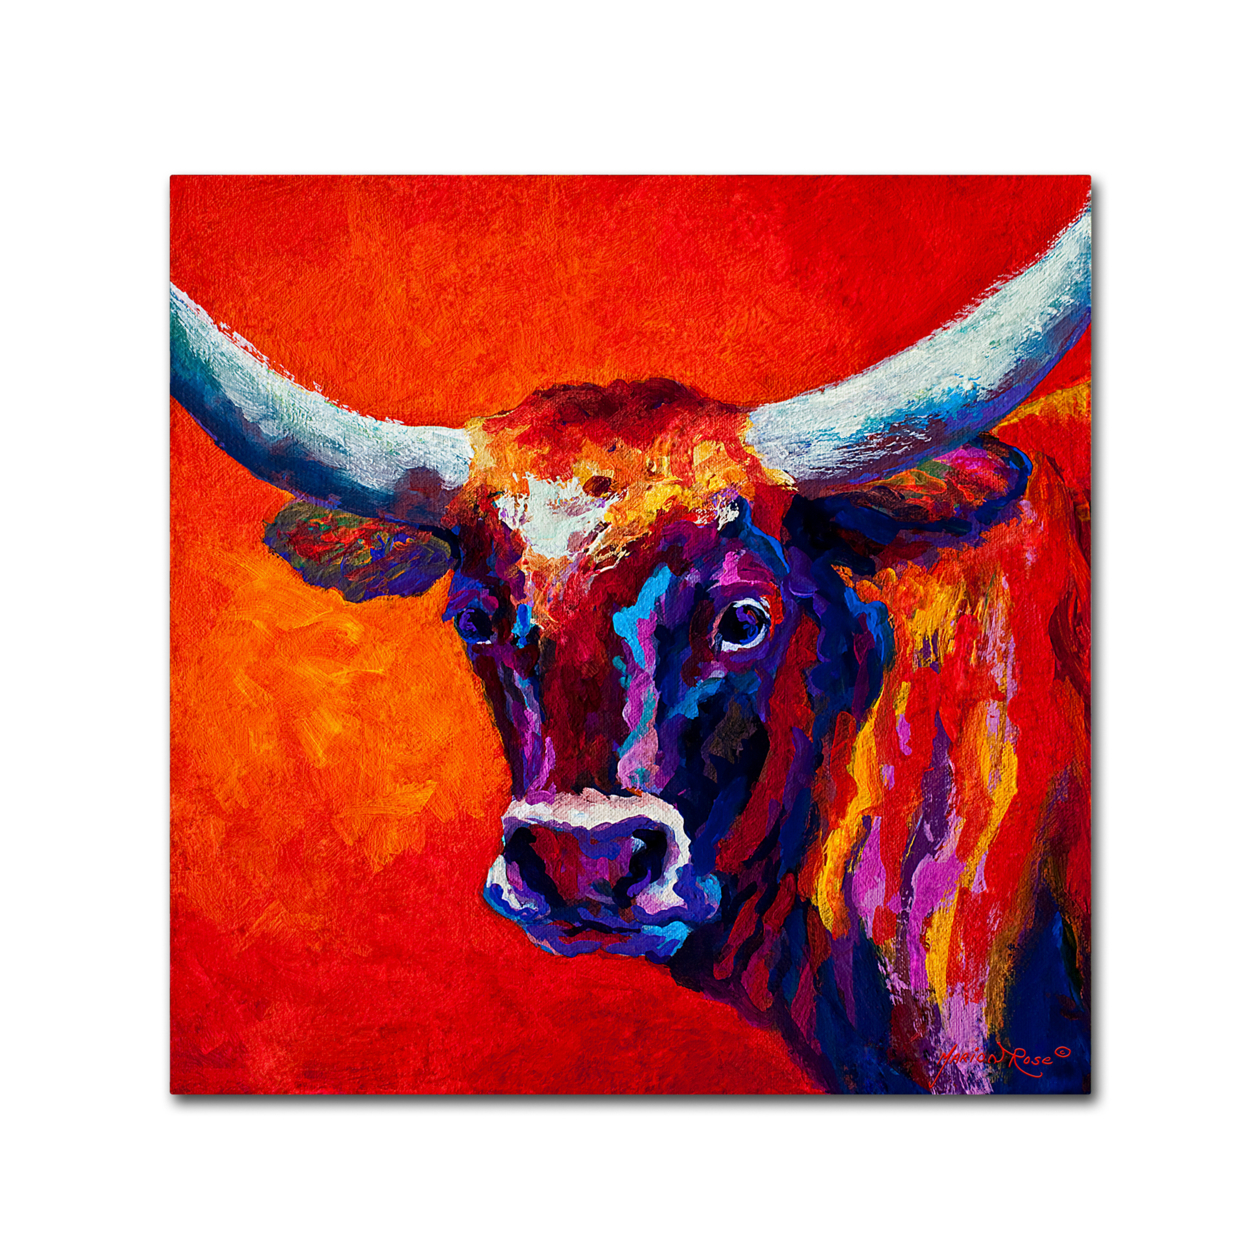 Marion Rose 'Steer' Ready To Hang Canvas Art 24 X 24 Inches Made In USA